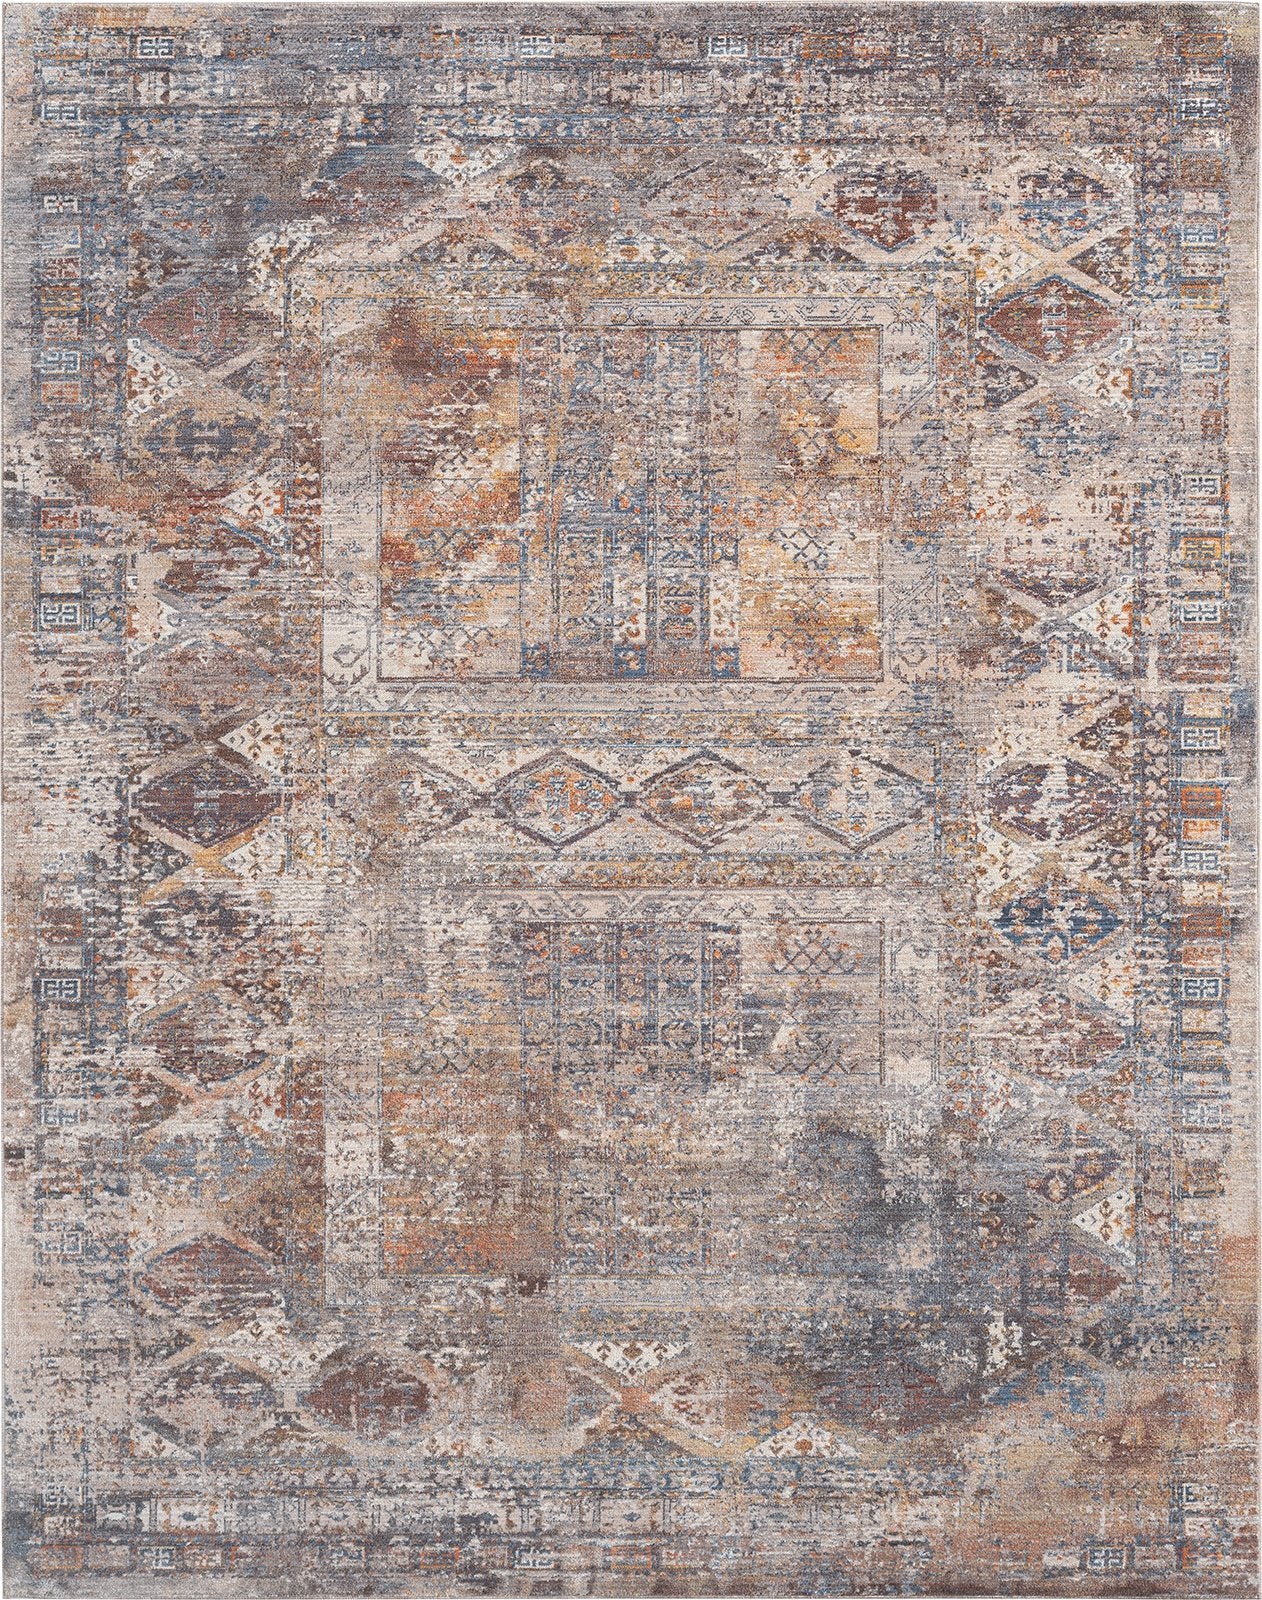 Calabria Blue Tones and Earth Transitional Area Rug